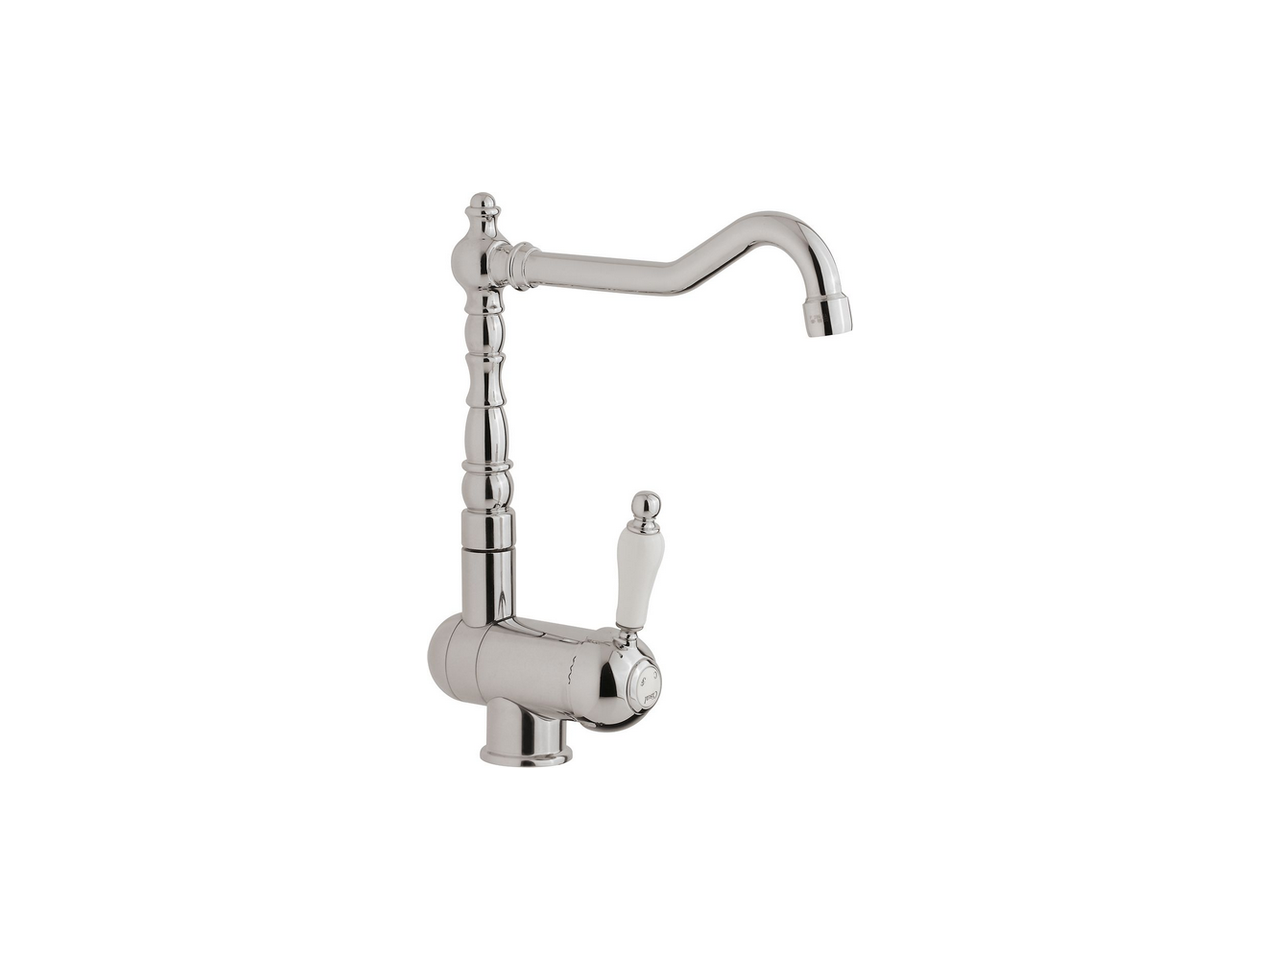 Single lever sink mixer with reclined spout KITCHEN_EM001530 - v1